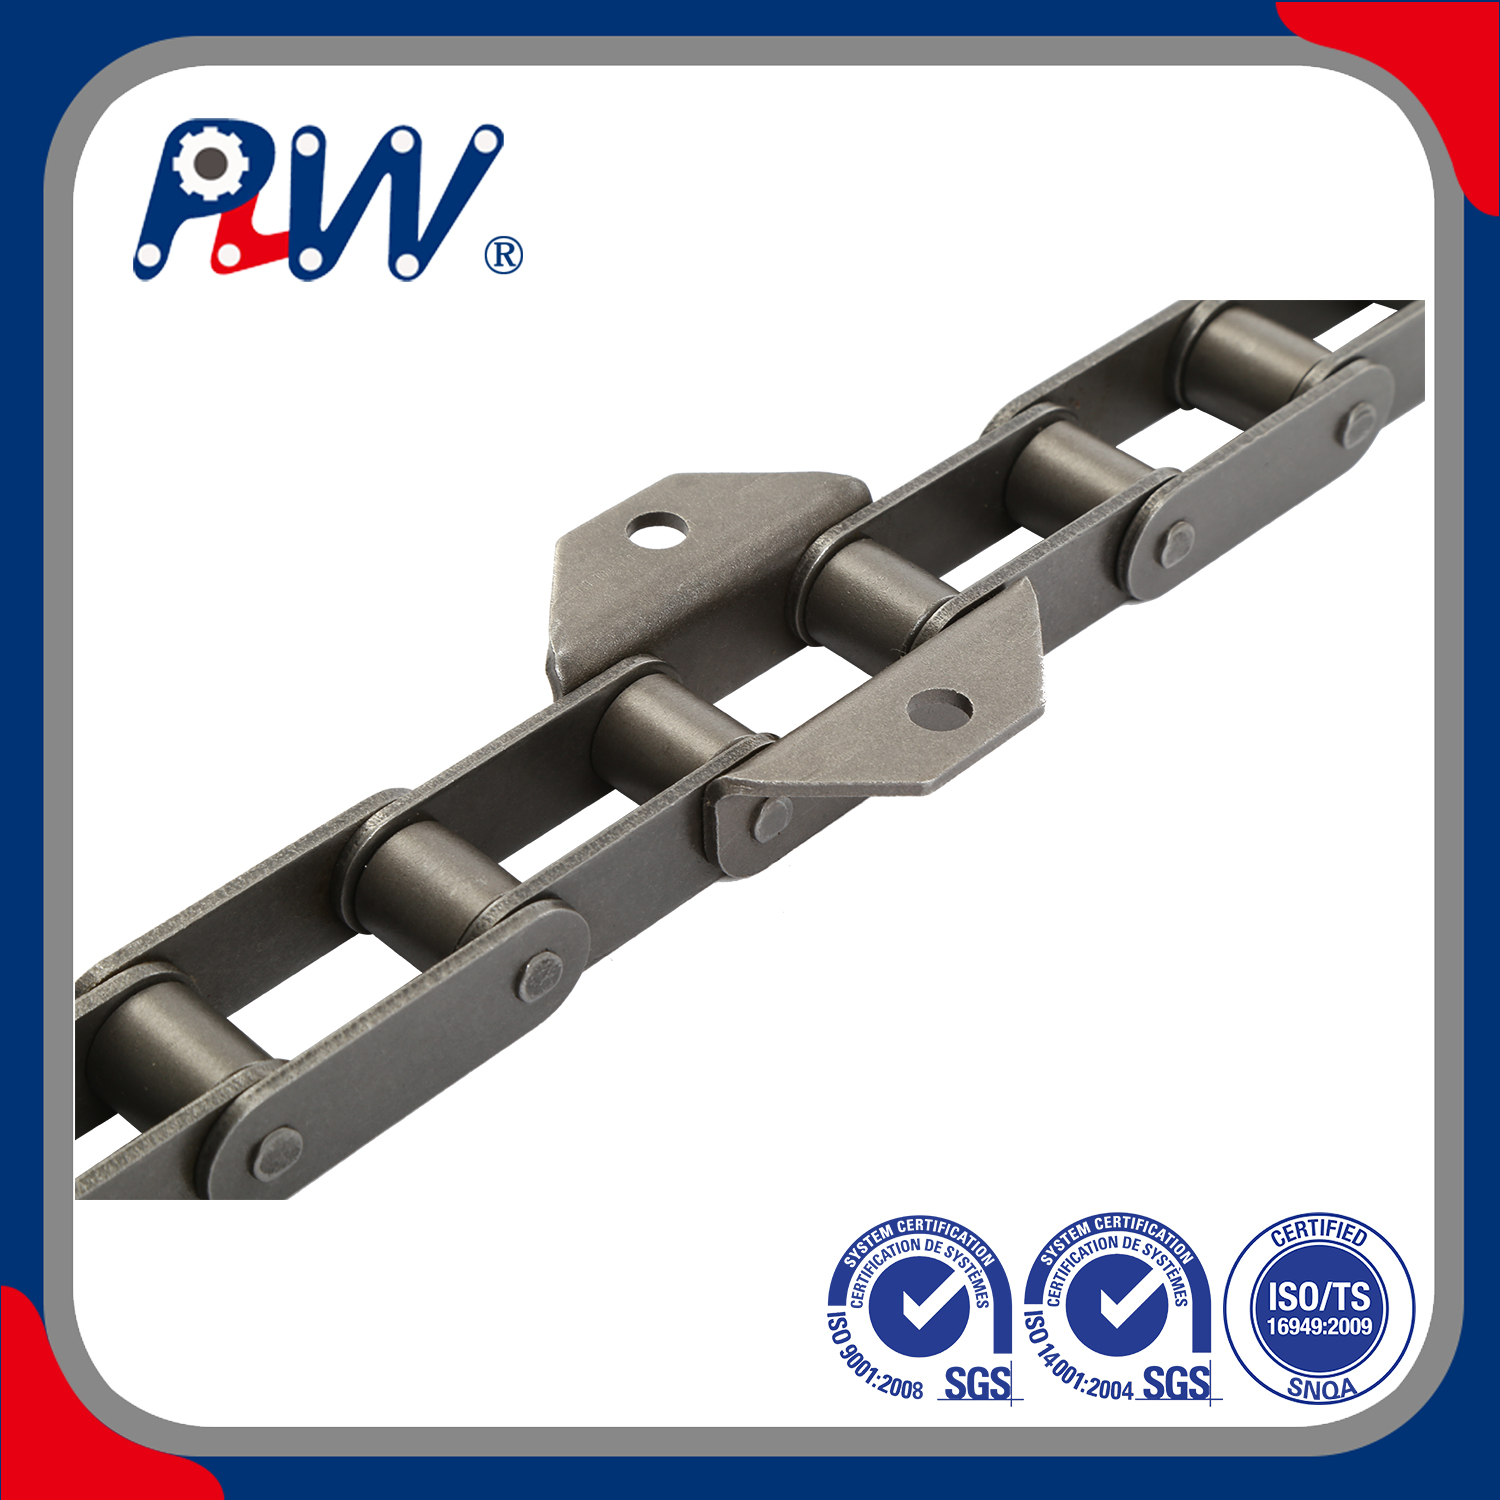 C Type Machinery Engineering Industrial High Precision Agricultural Chain with Attachments